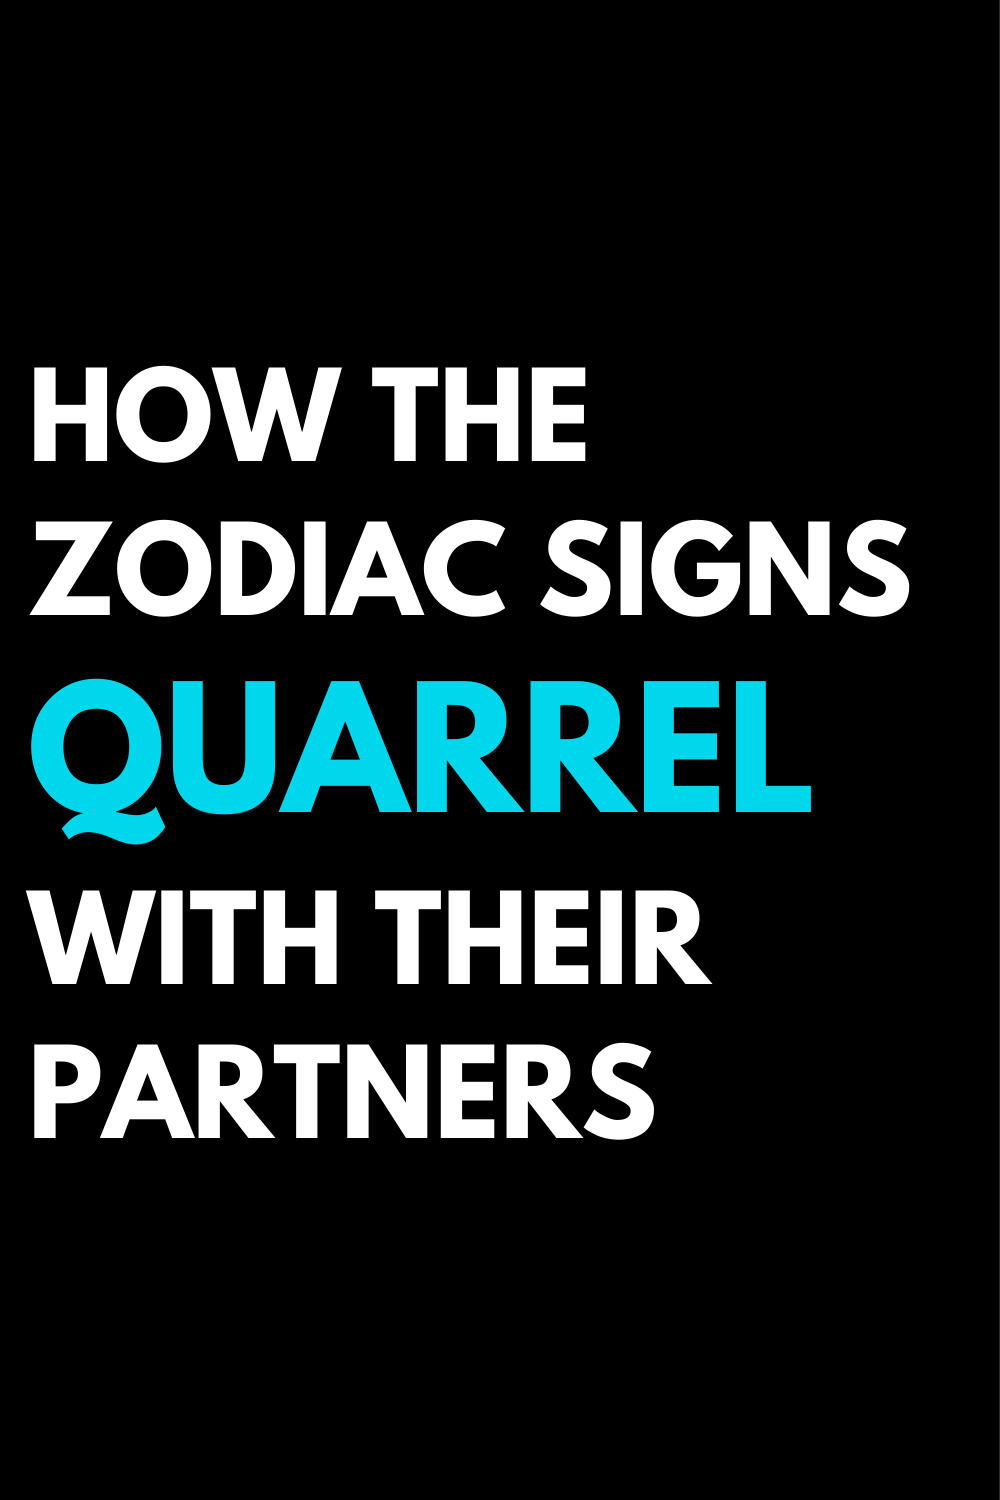 How the zodiac signs quarrel with their partners